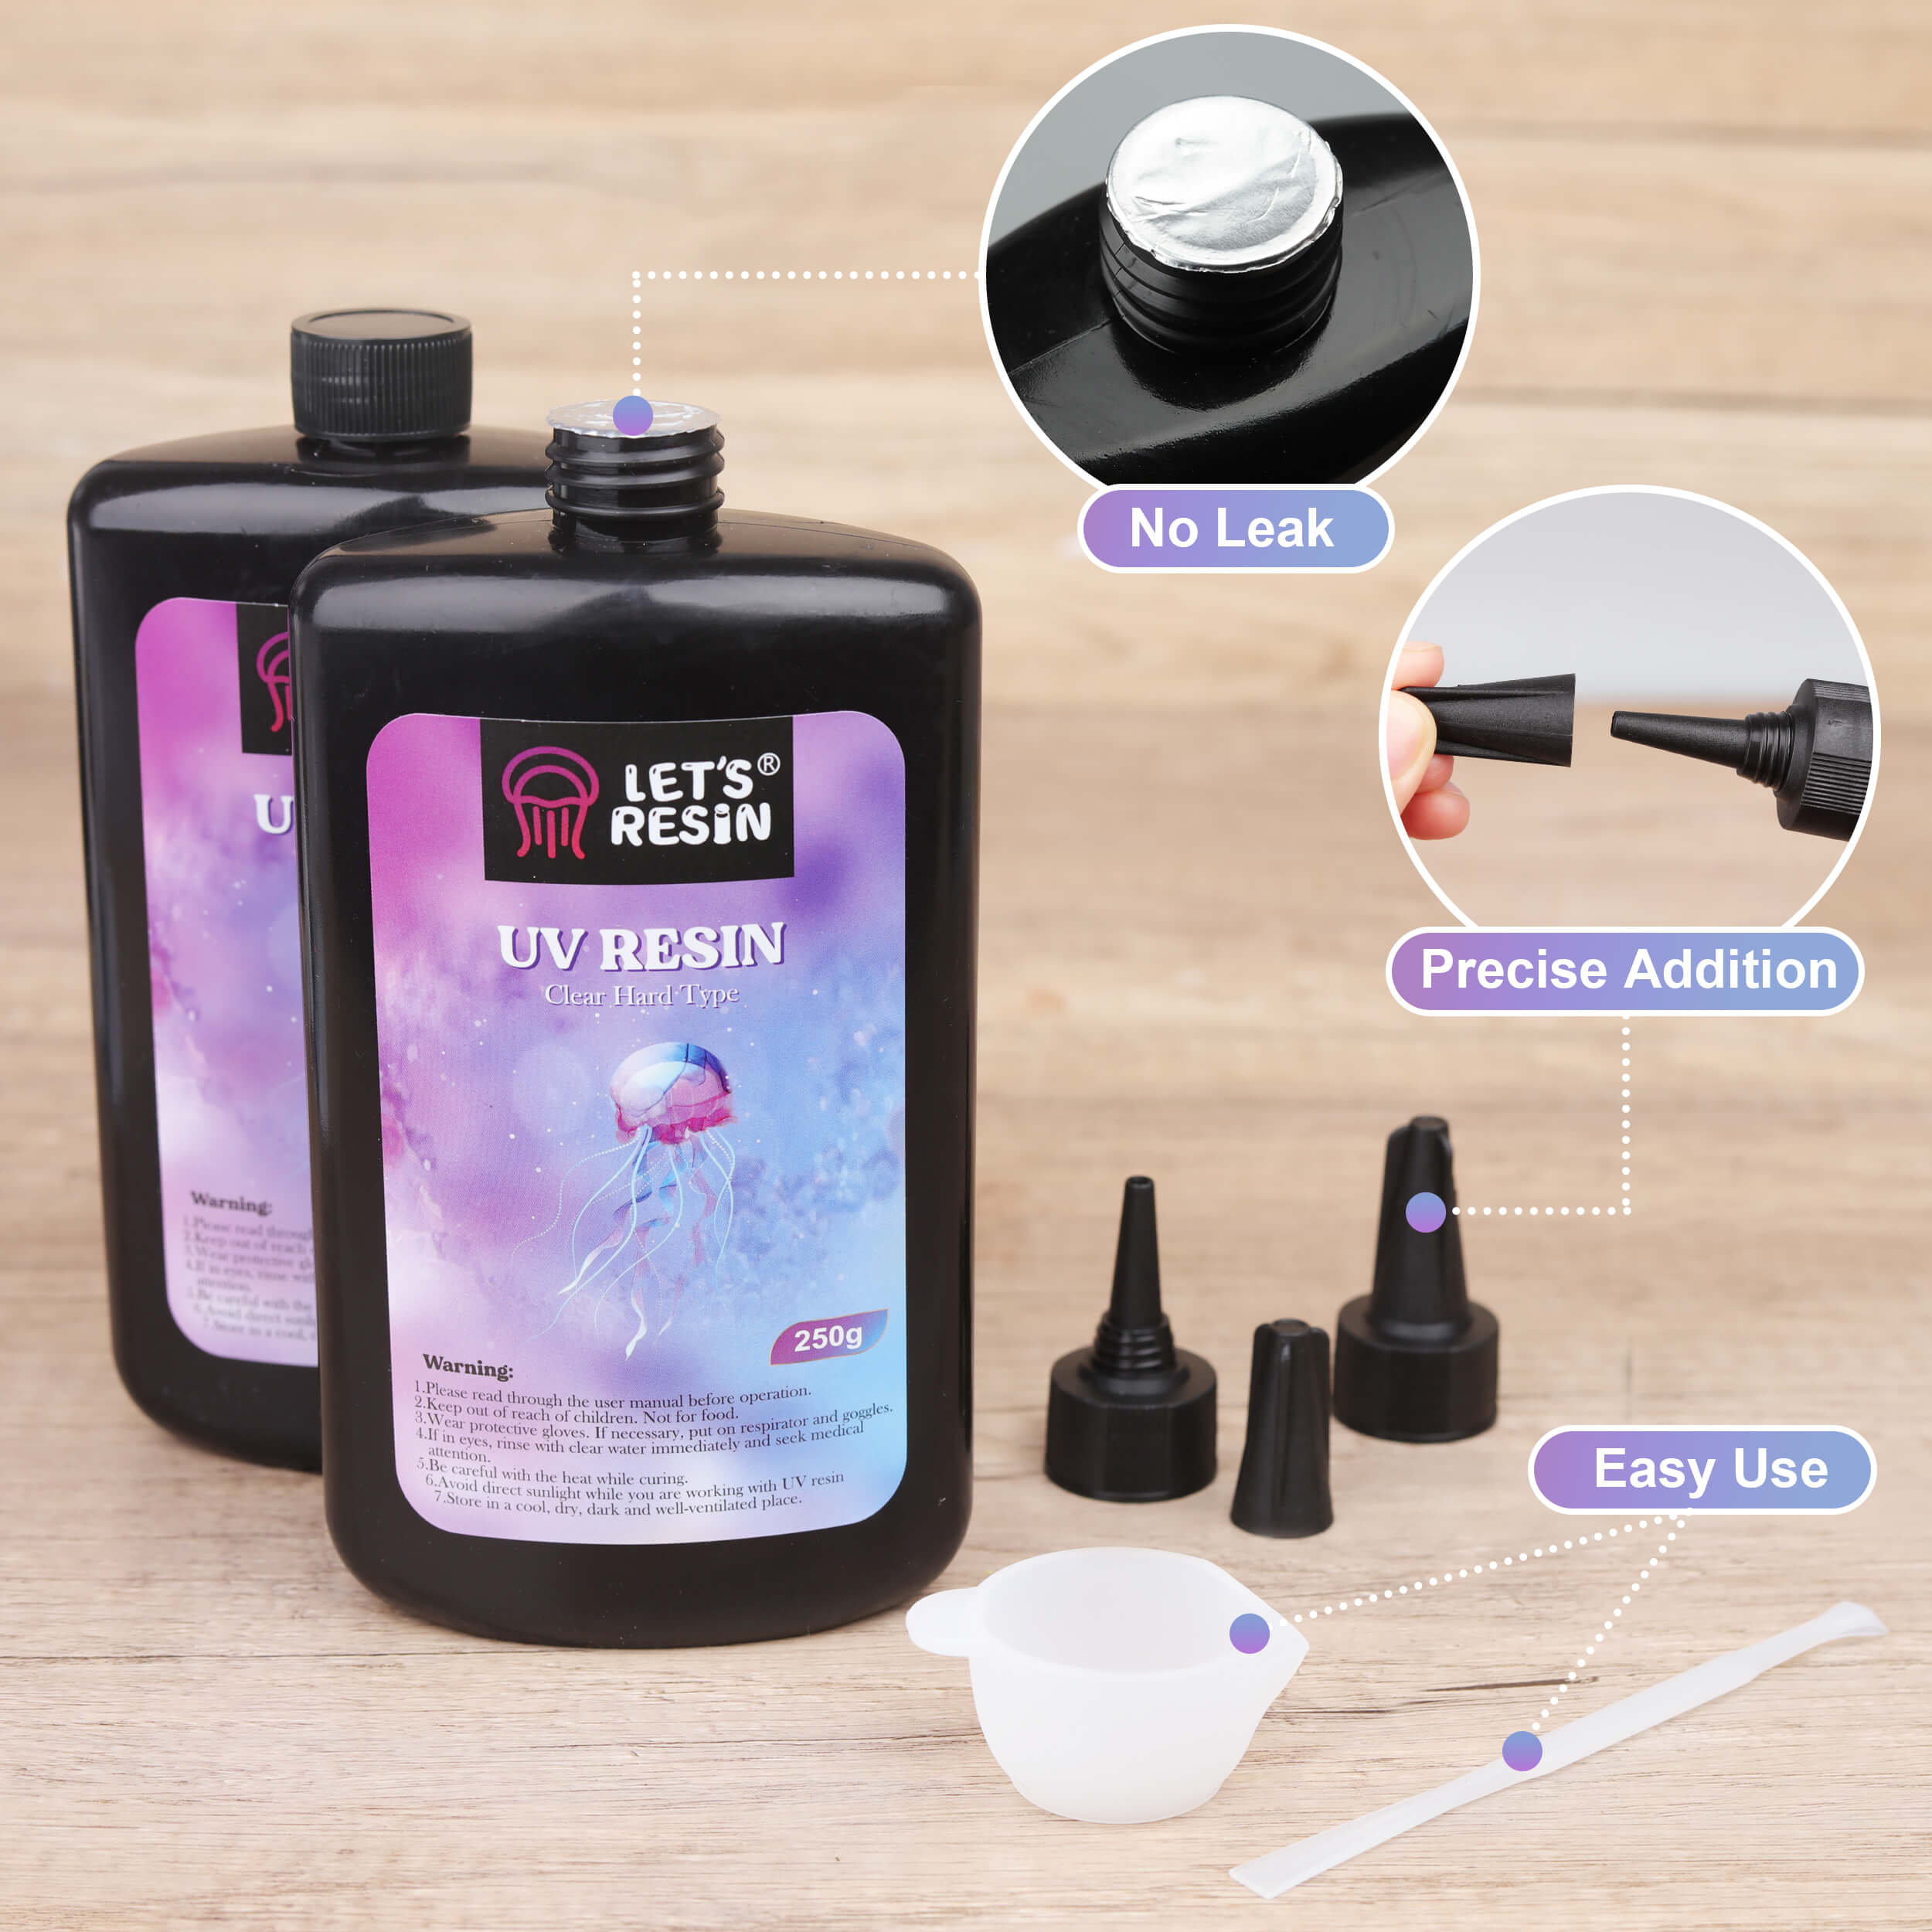 LET'S RESIN UV Resin Kit with Light,153Pcs Resin Jewelry Making Kit with  250g Crystal Clear Low Odor UV Resin, UV Lamp, Resin Accessories, Epoxy  Resin Starter Kit for Keychain, Jewelry, Home Decor